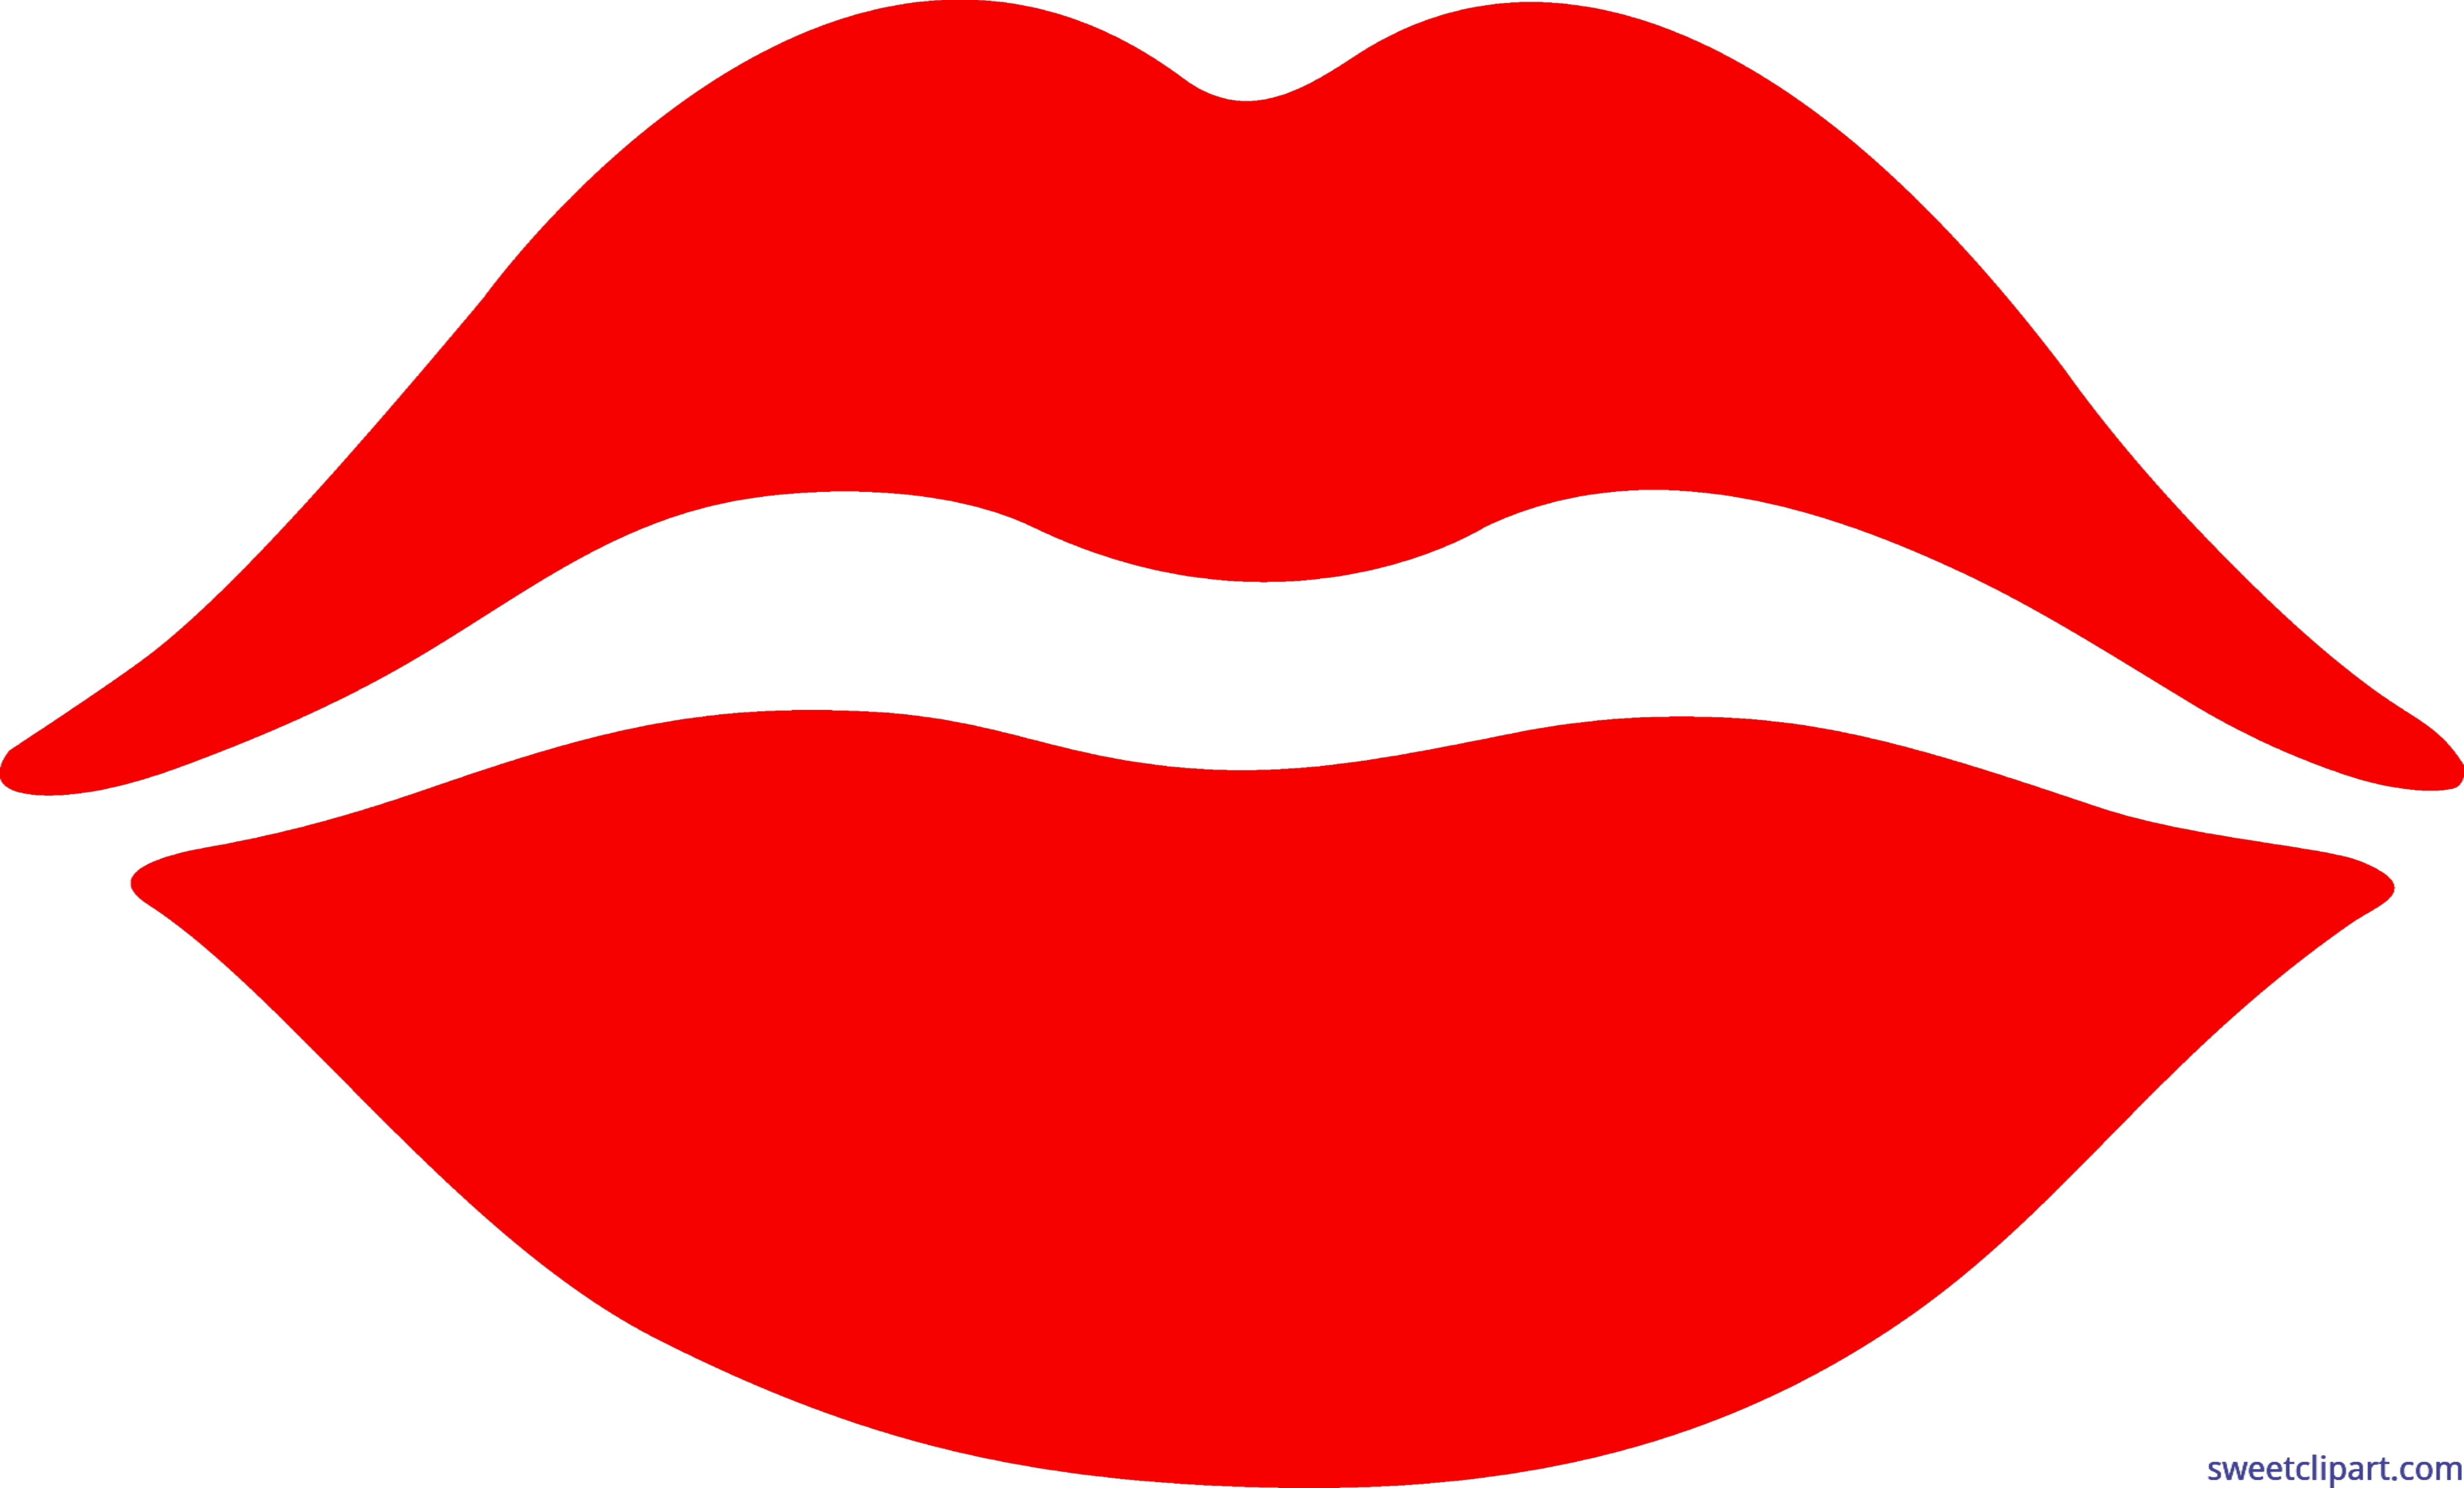 Lip clipart free download on WebStockReview